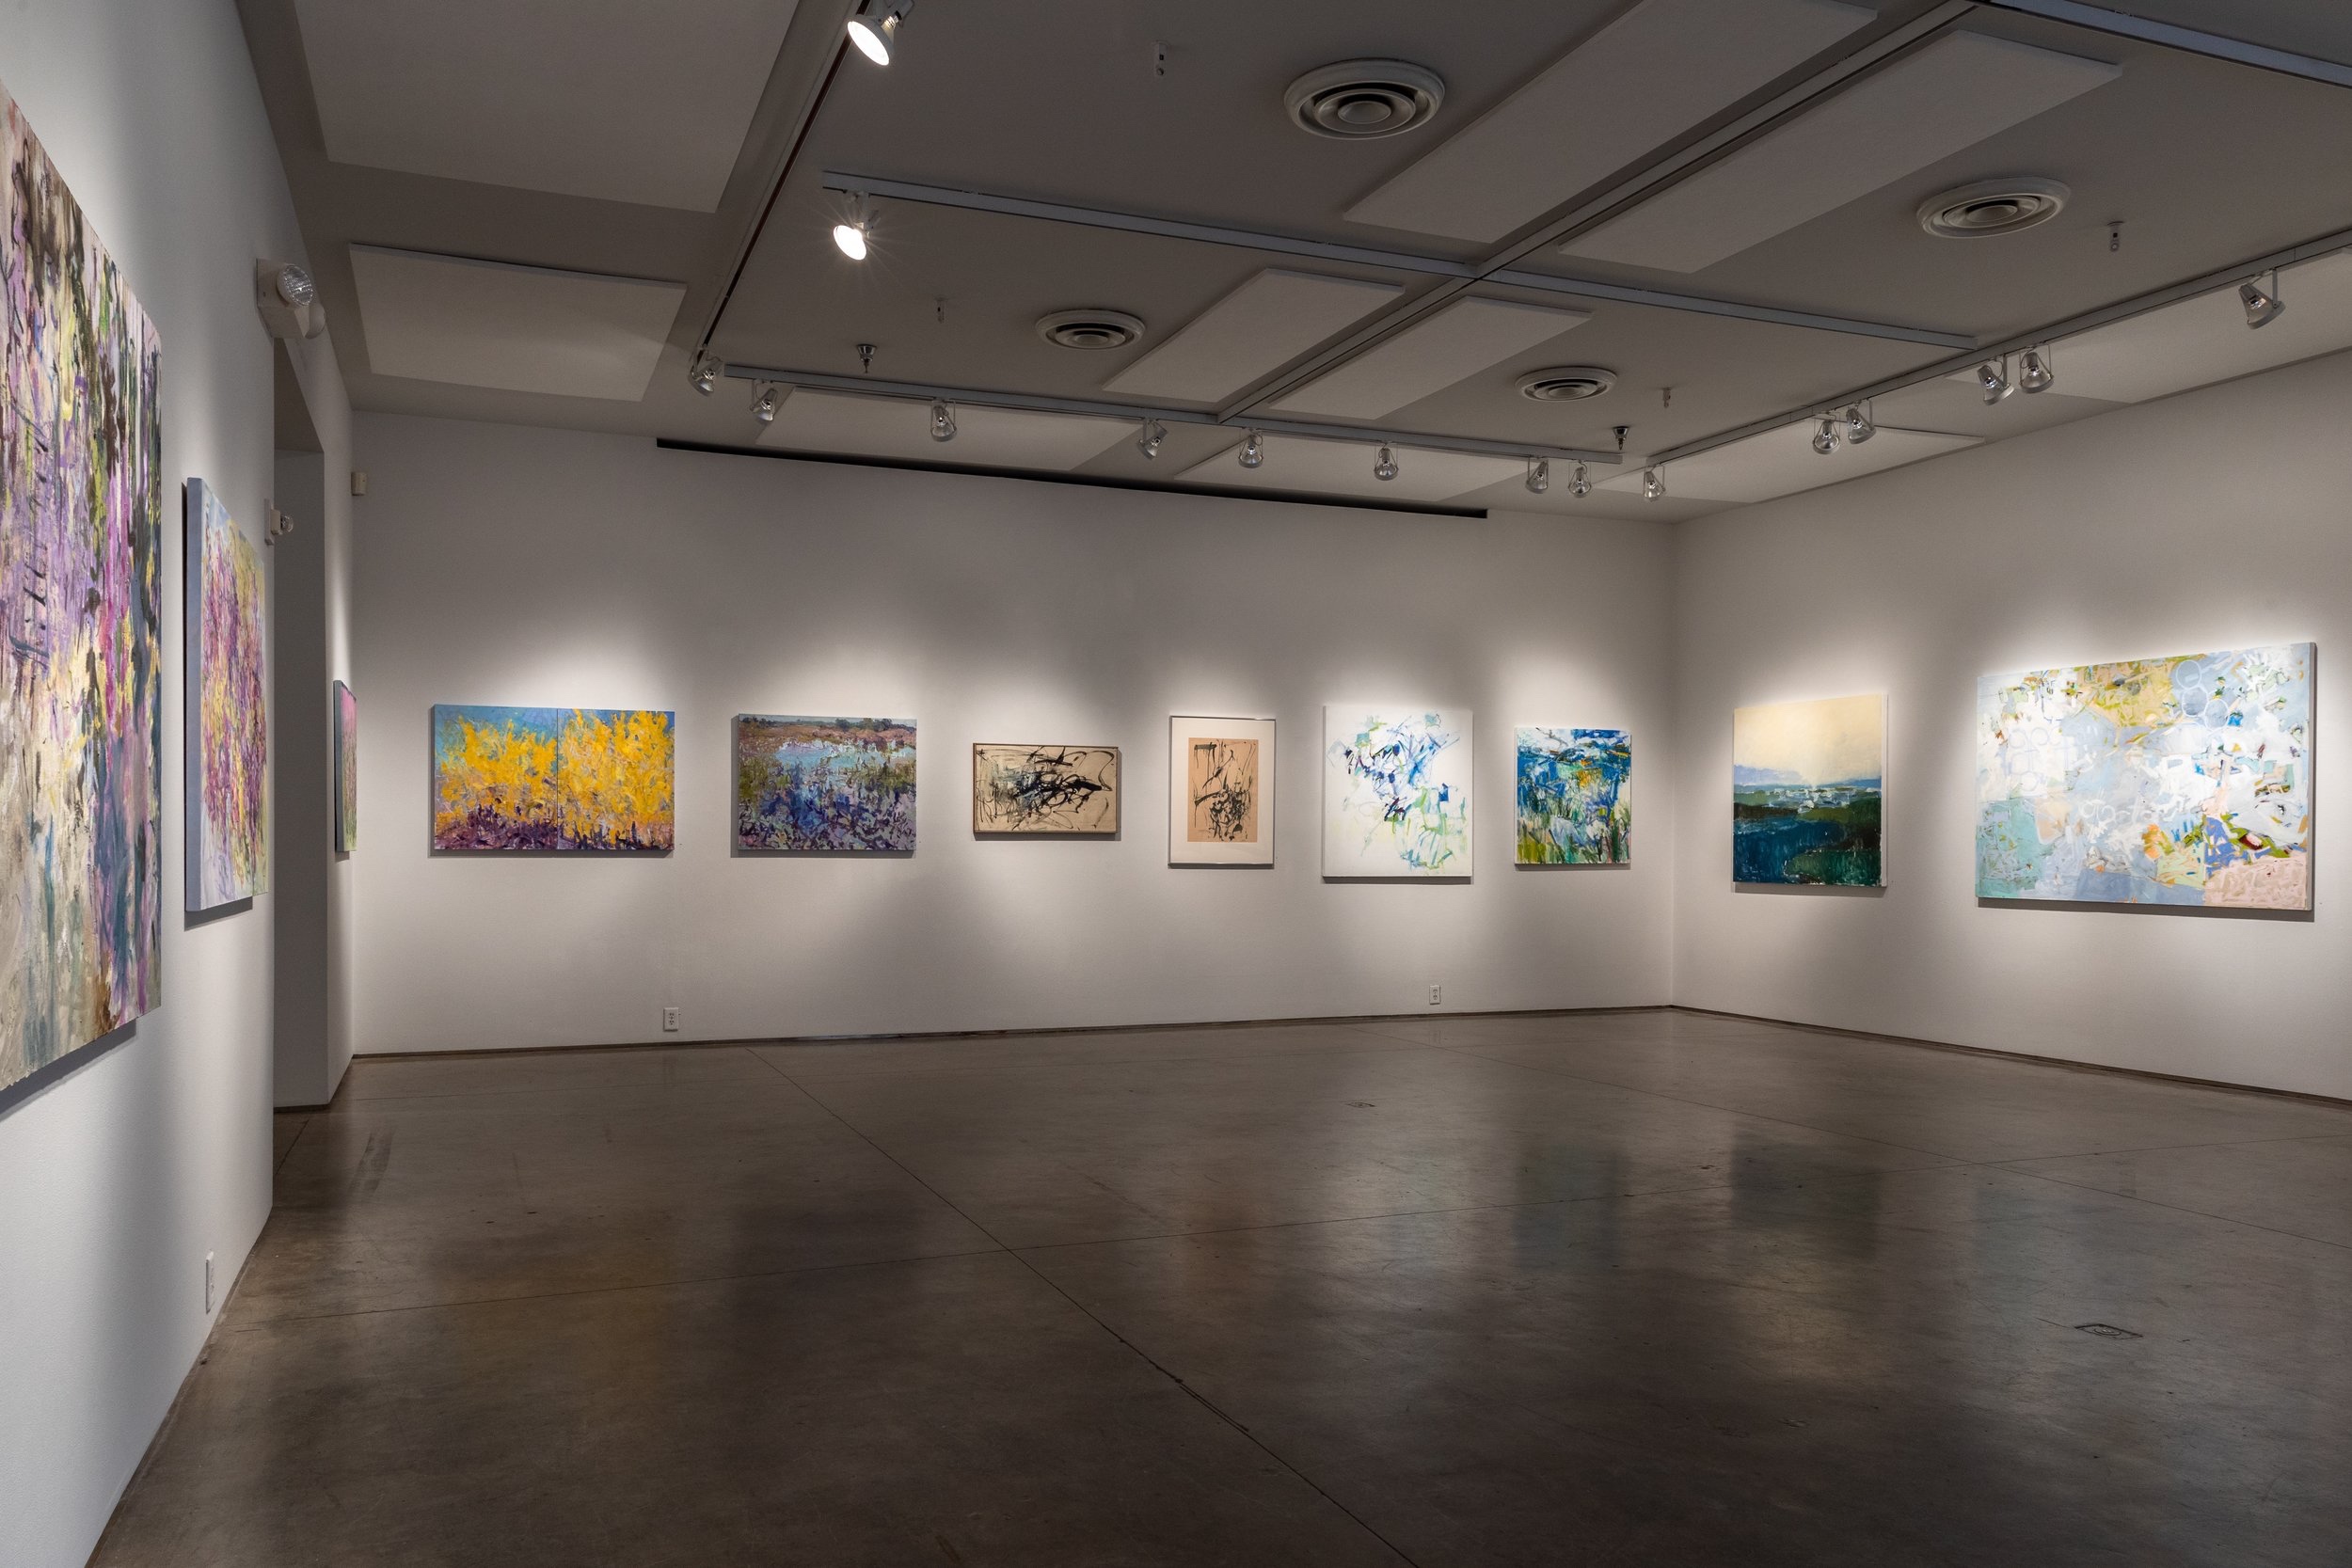 Installation View, "Lady Painters" with Joan Mitchell